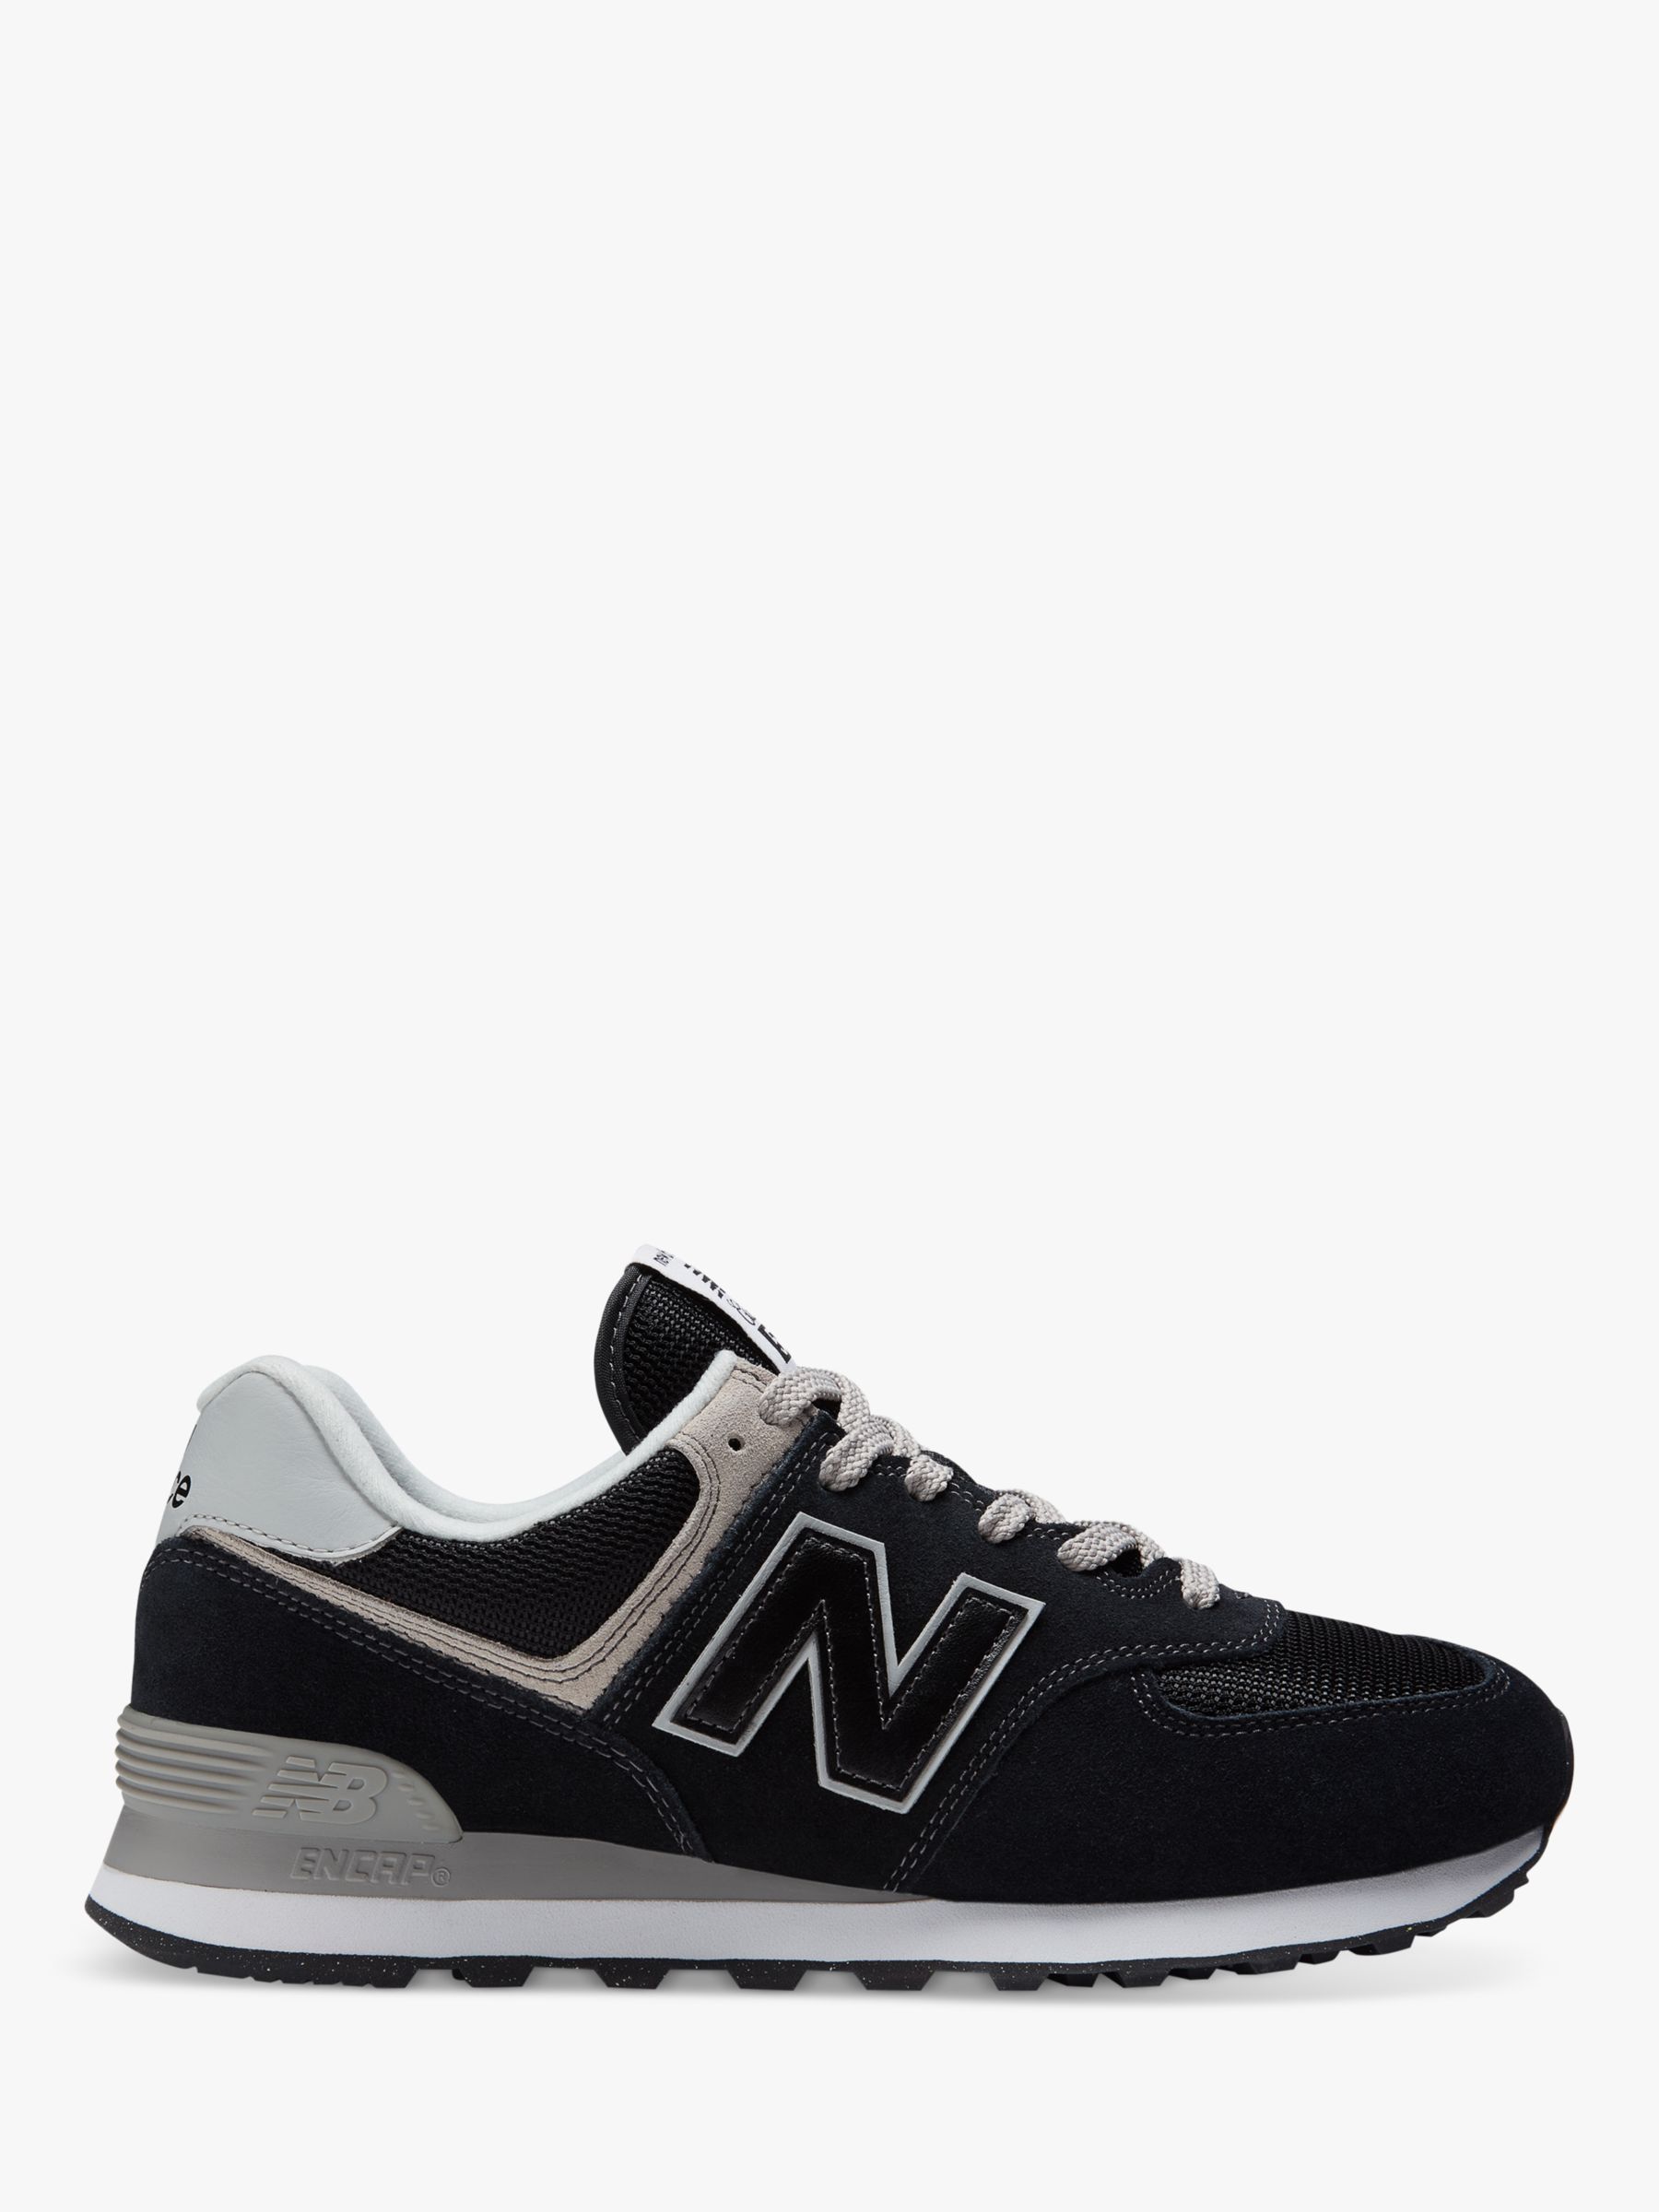 Men's sneakers and shoes New Balance 574 Black